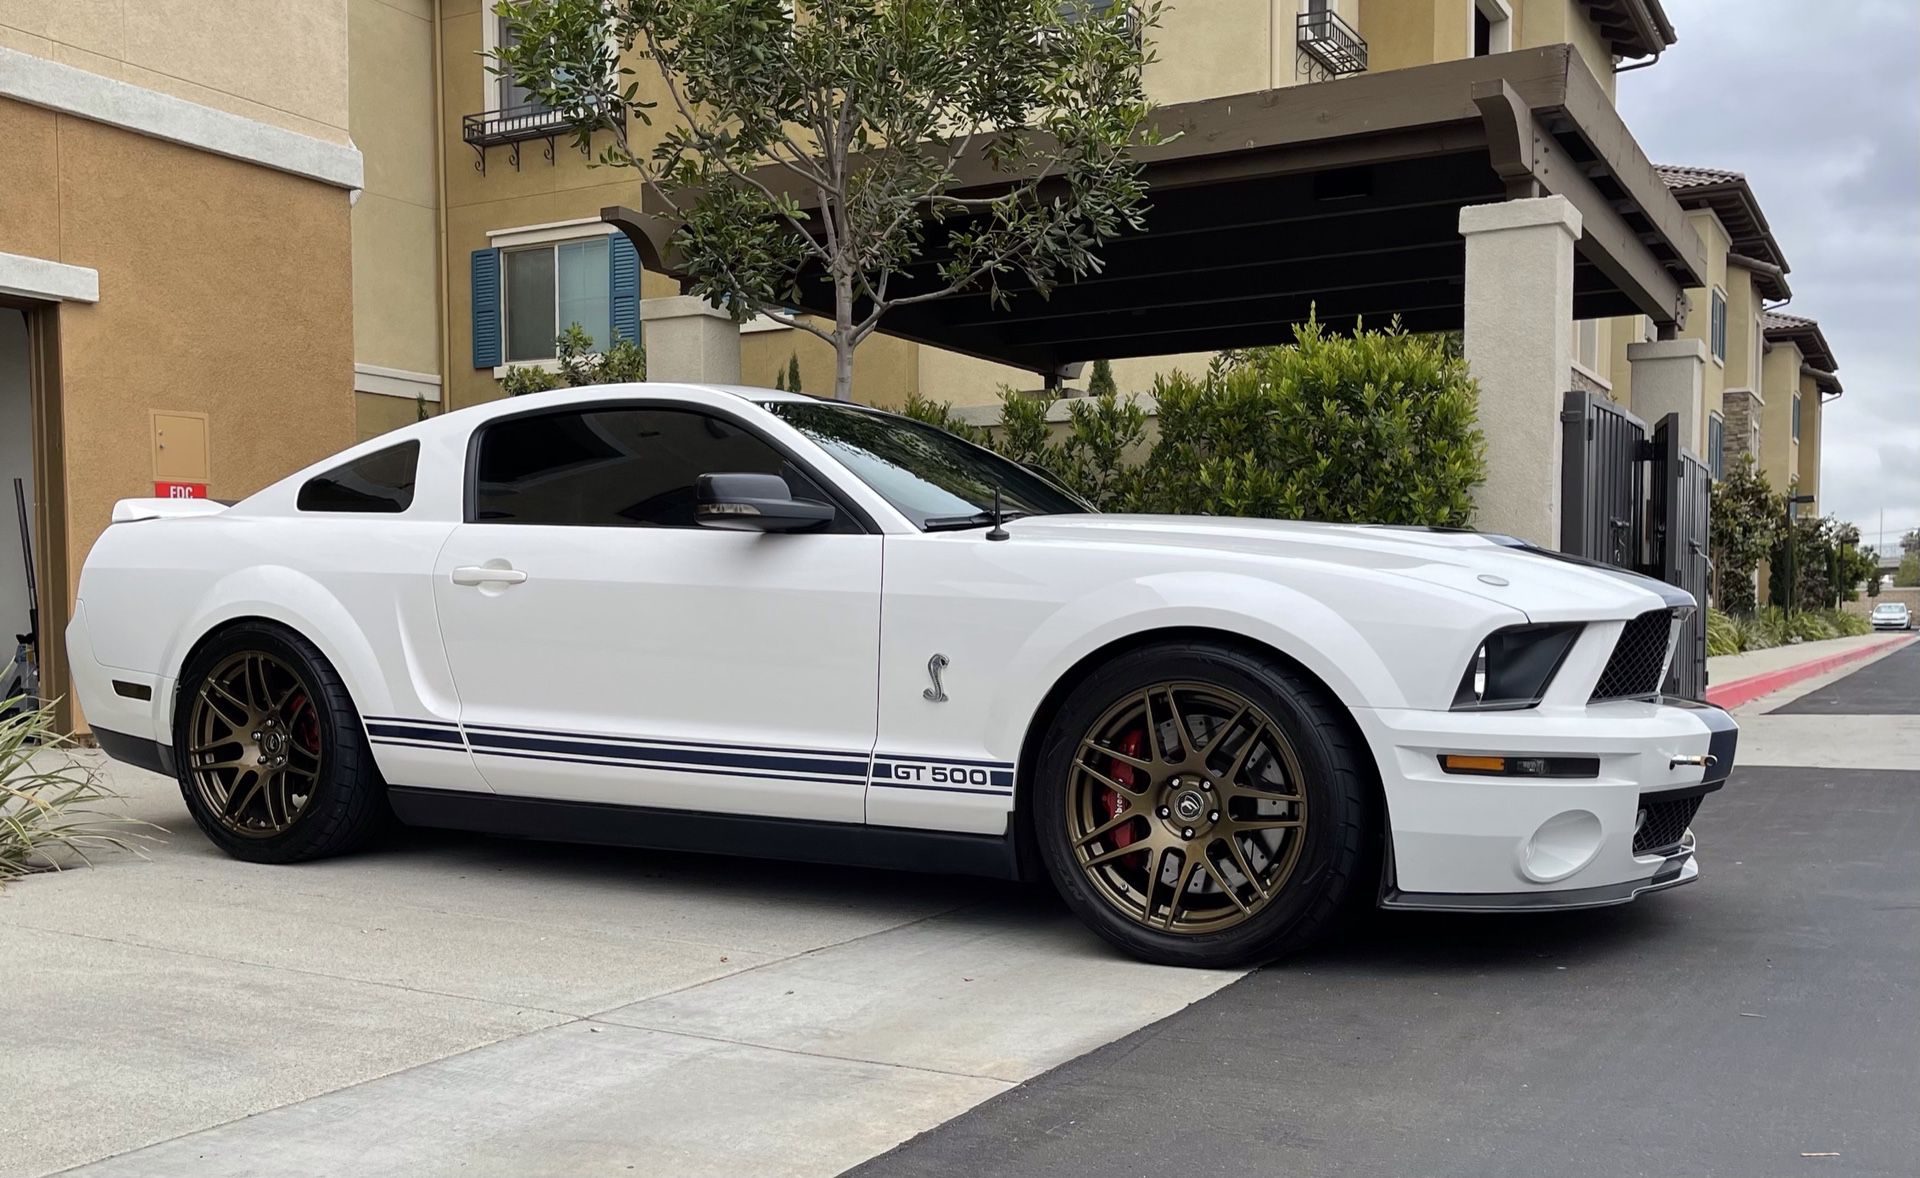 2007 Ford Mustang Shelby Gt500